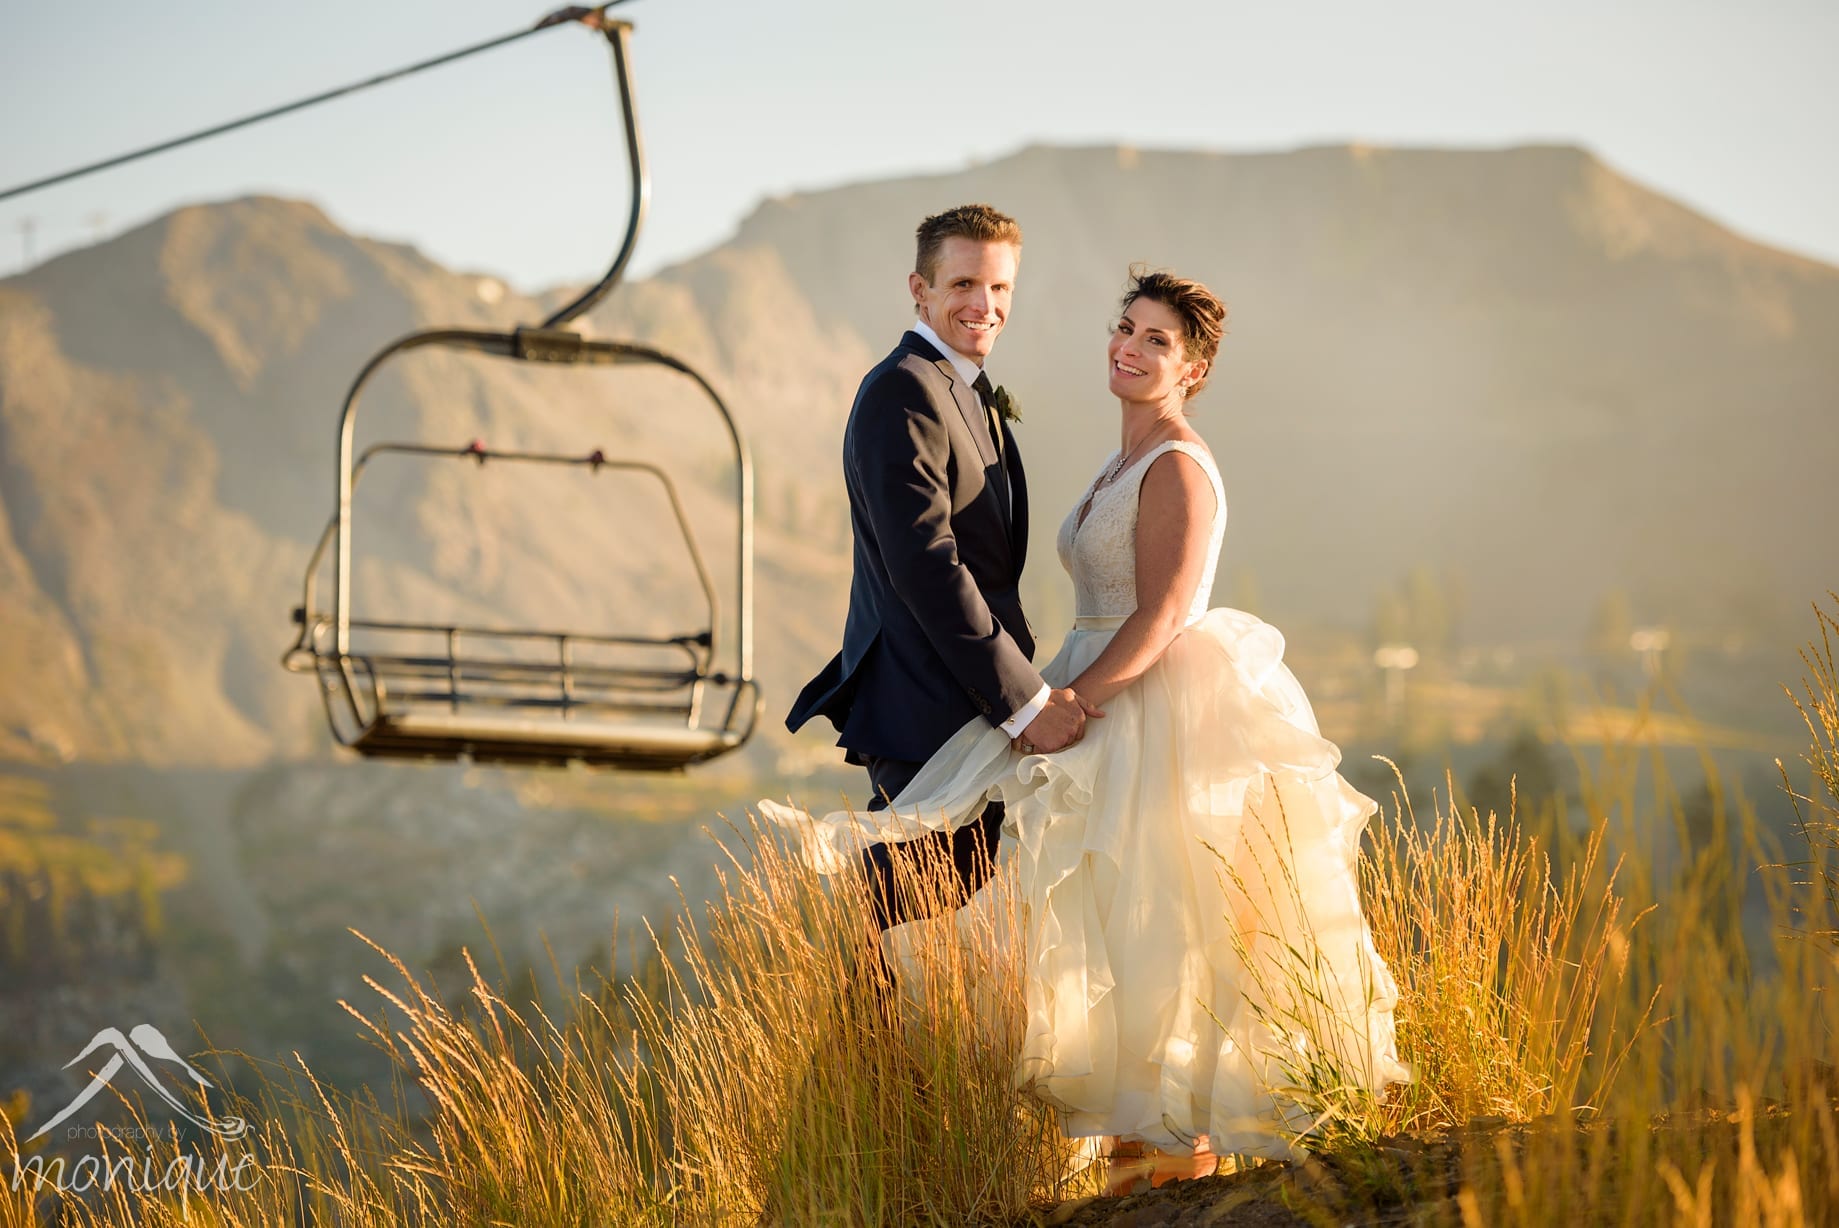 Squaw Valley High Camp wedding photography at sunset with the chair lifts the Palisades in the background by local photographers Photography by Monique